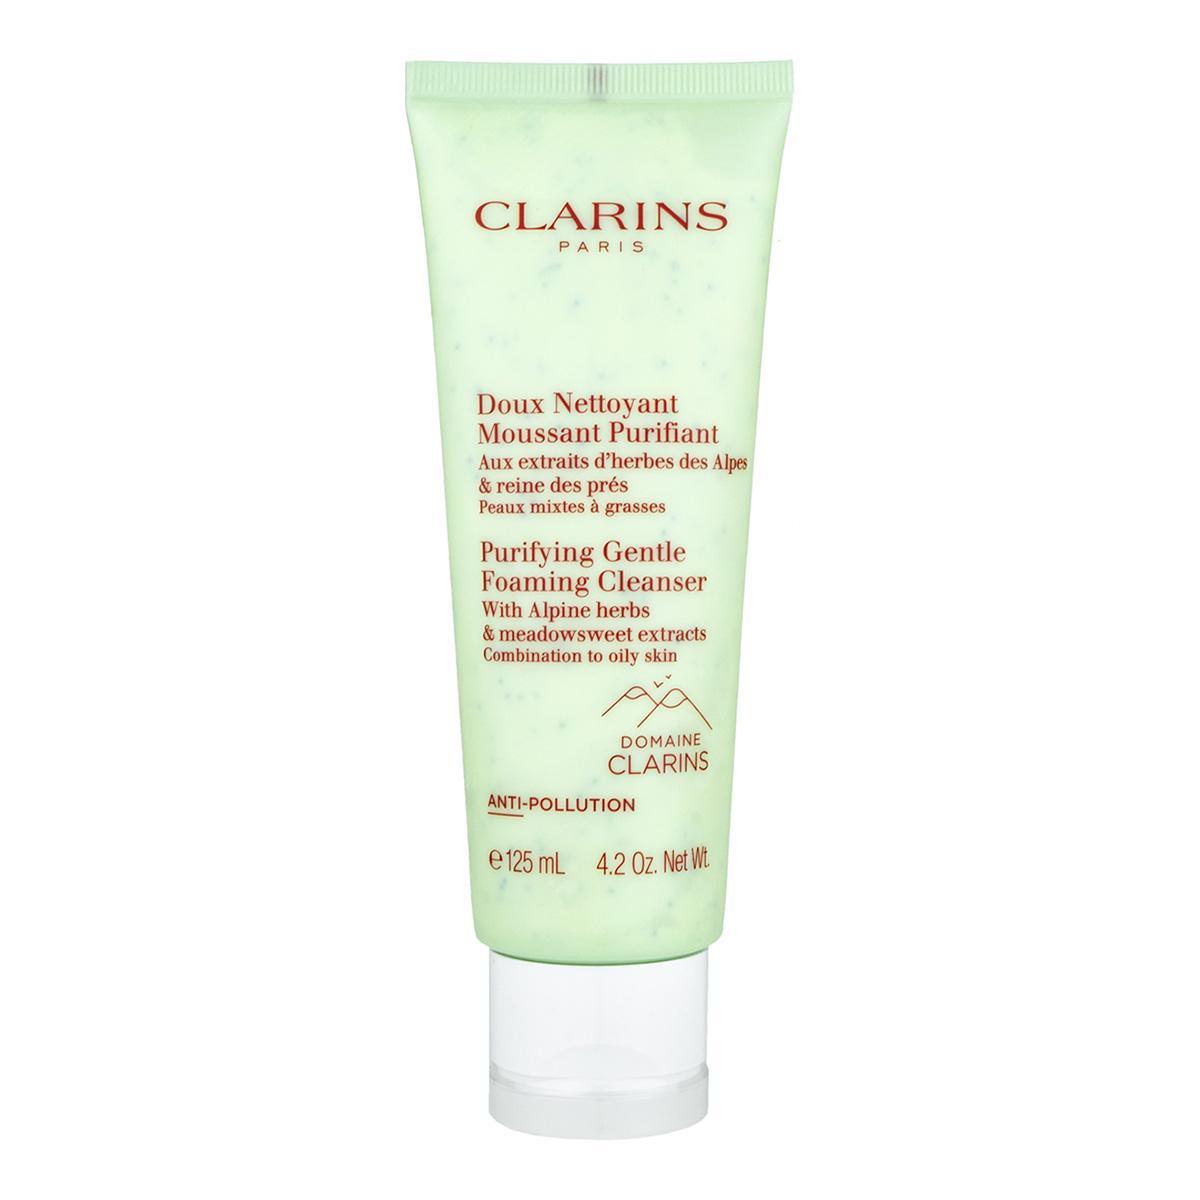 Clarins Purifying Gentle Foaming Cleanser With Alpine Herbs & Meadowsweet Extracts Почистващ ексфолиант за комбинирна към мазна кожа без опаковка